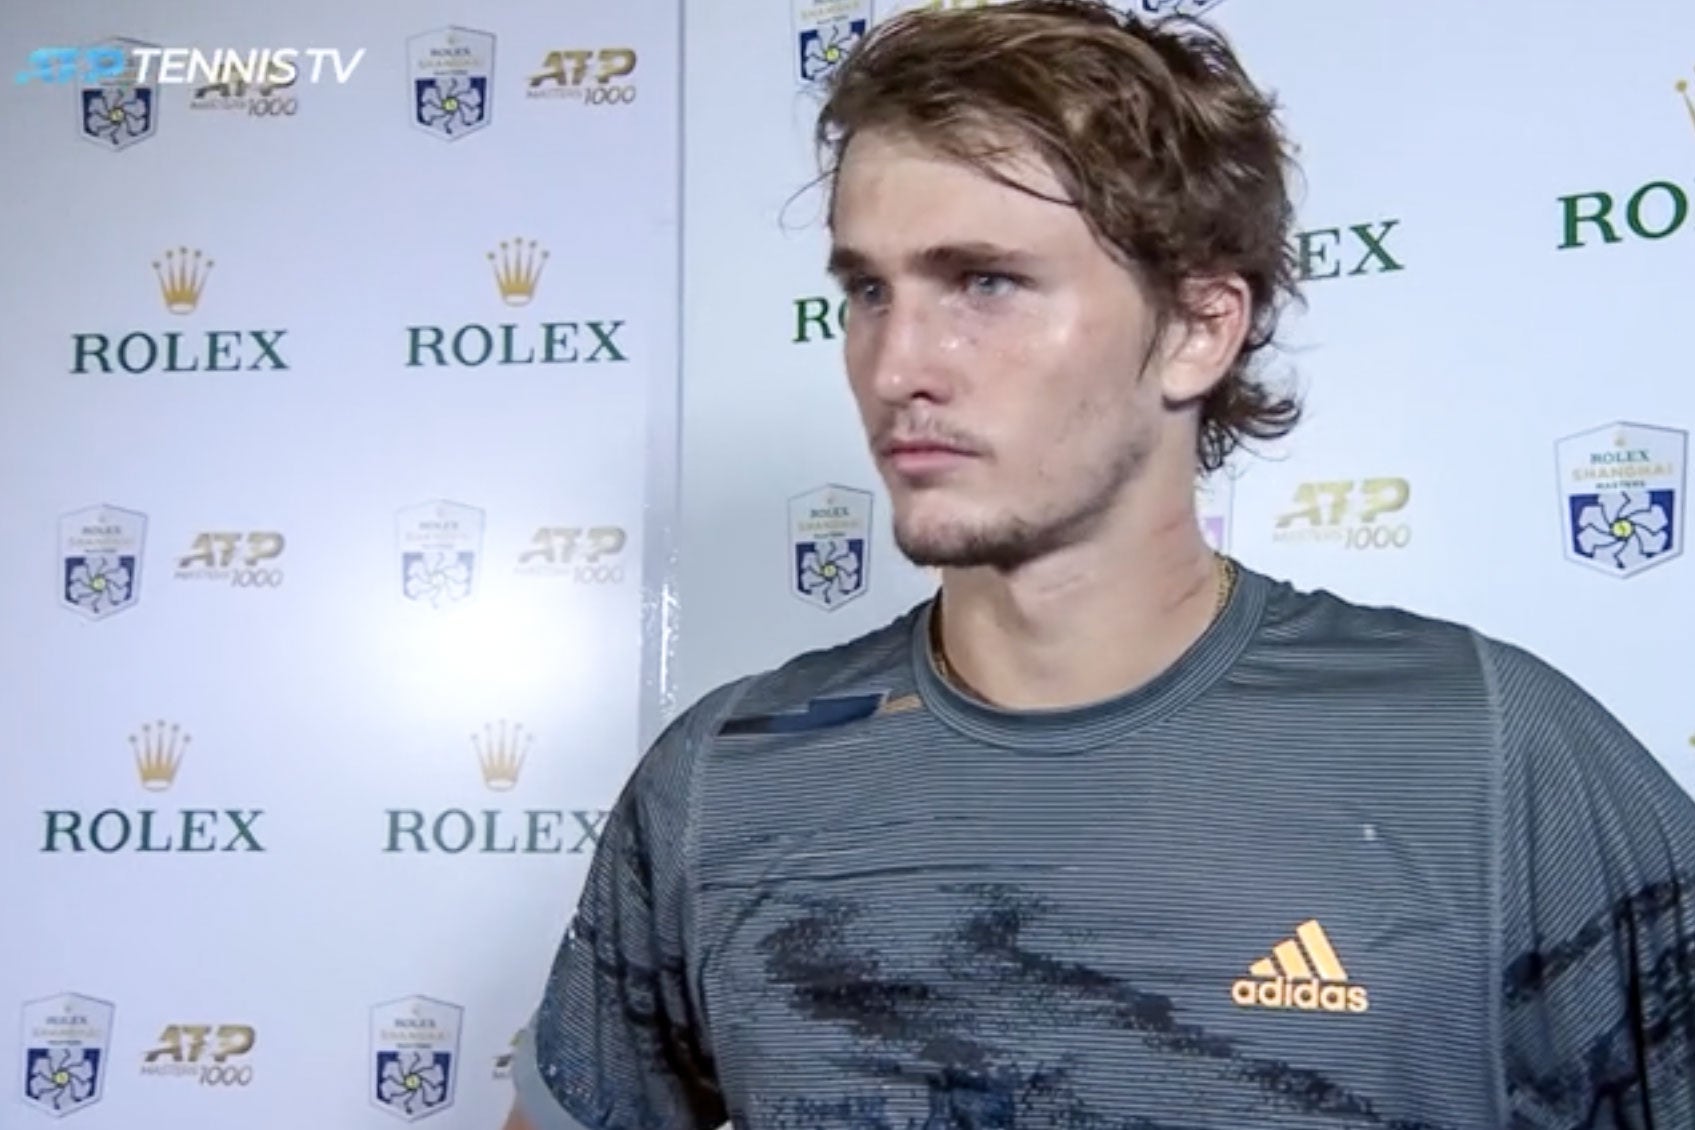 Zverev standing with his face slightly turned, showing red markings on his neck